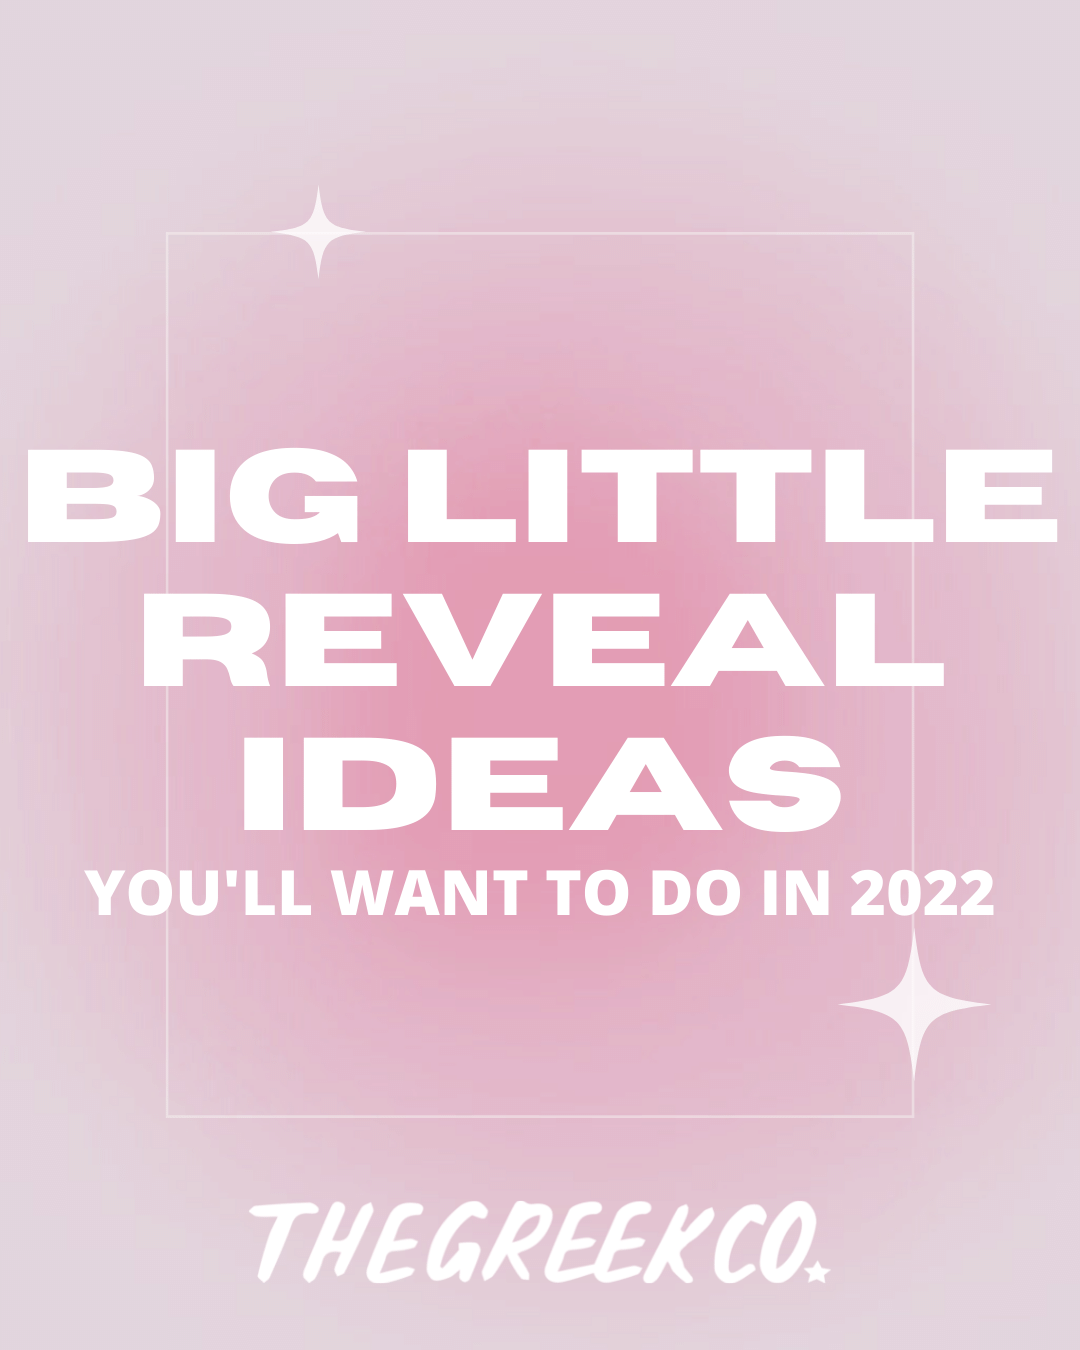 Big Little Reveal Ideas You'll Want To Do In 2022 - The Greek Co Blog Post